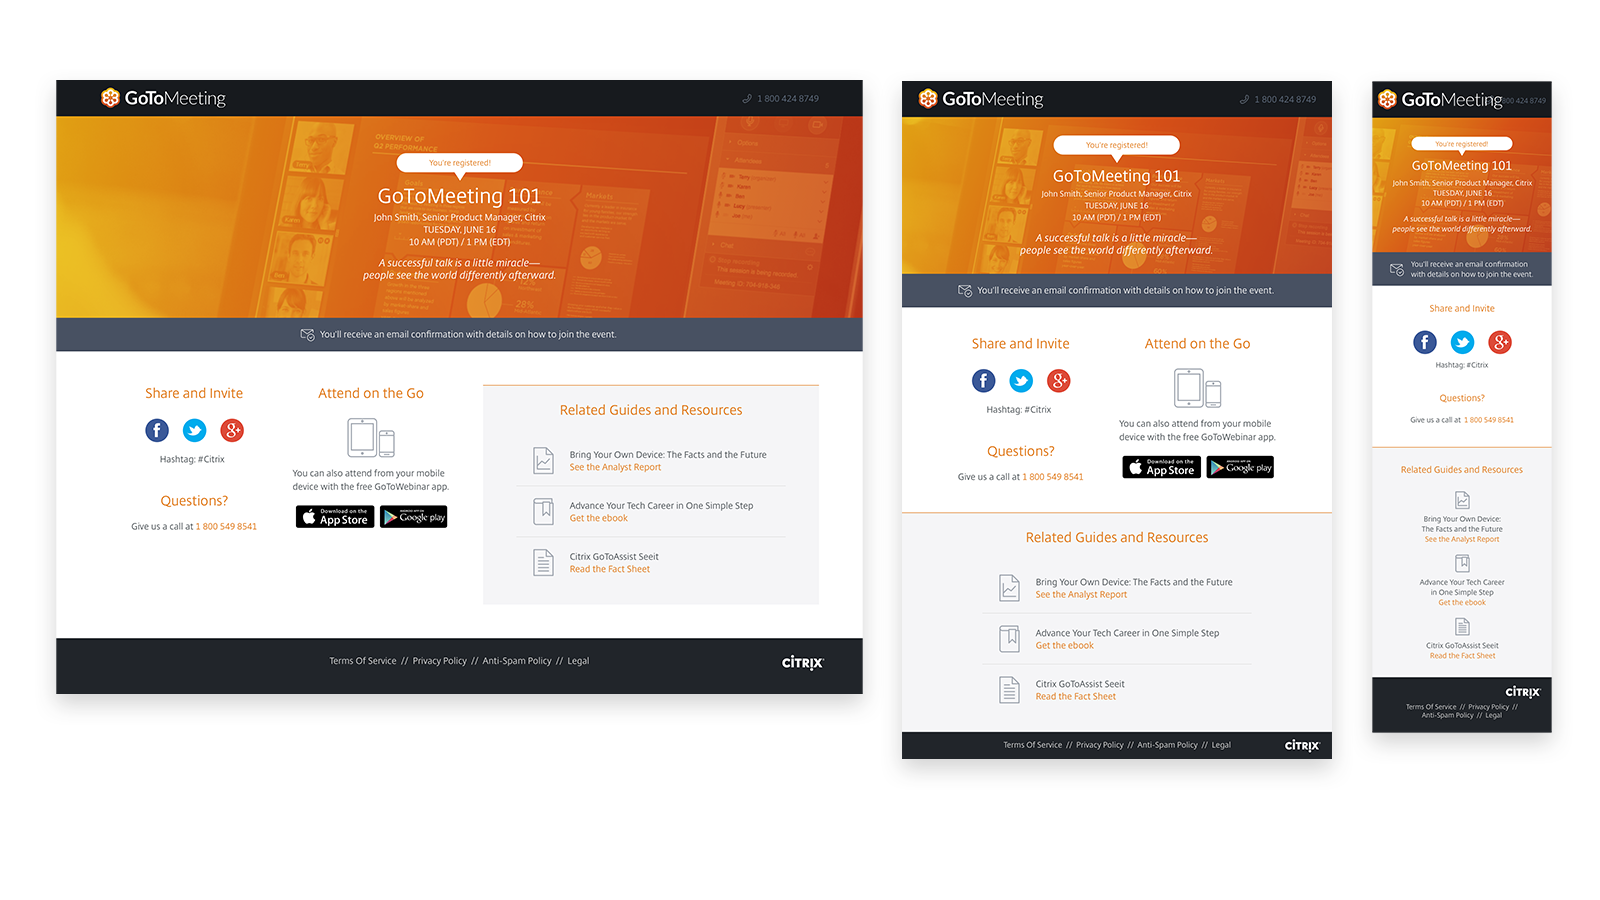 The final Landing page template designs for various content types